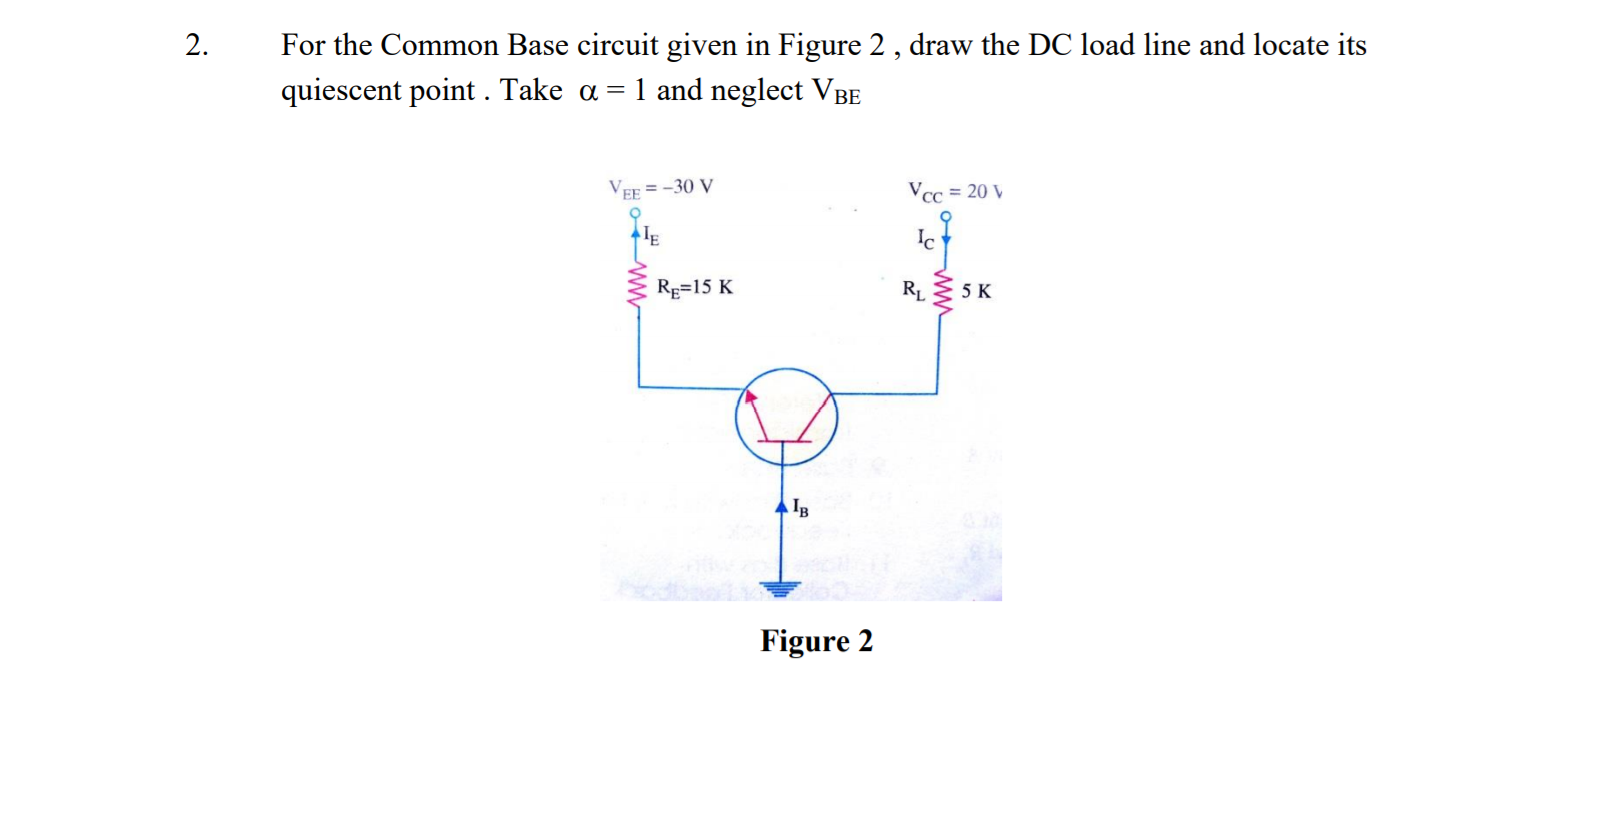 For the Common Base circuit given in Figure 2 , draw the DC load line and locate its
1 and neglect VBE
quiescent point . Take a =
VEF = -30 V
Vcc = 20 V
Ic
Rg=15 K
RL
5 K
Figure 2
